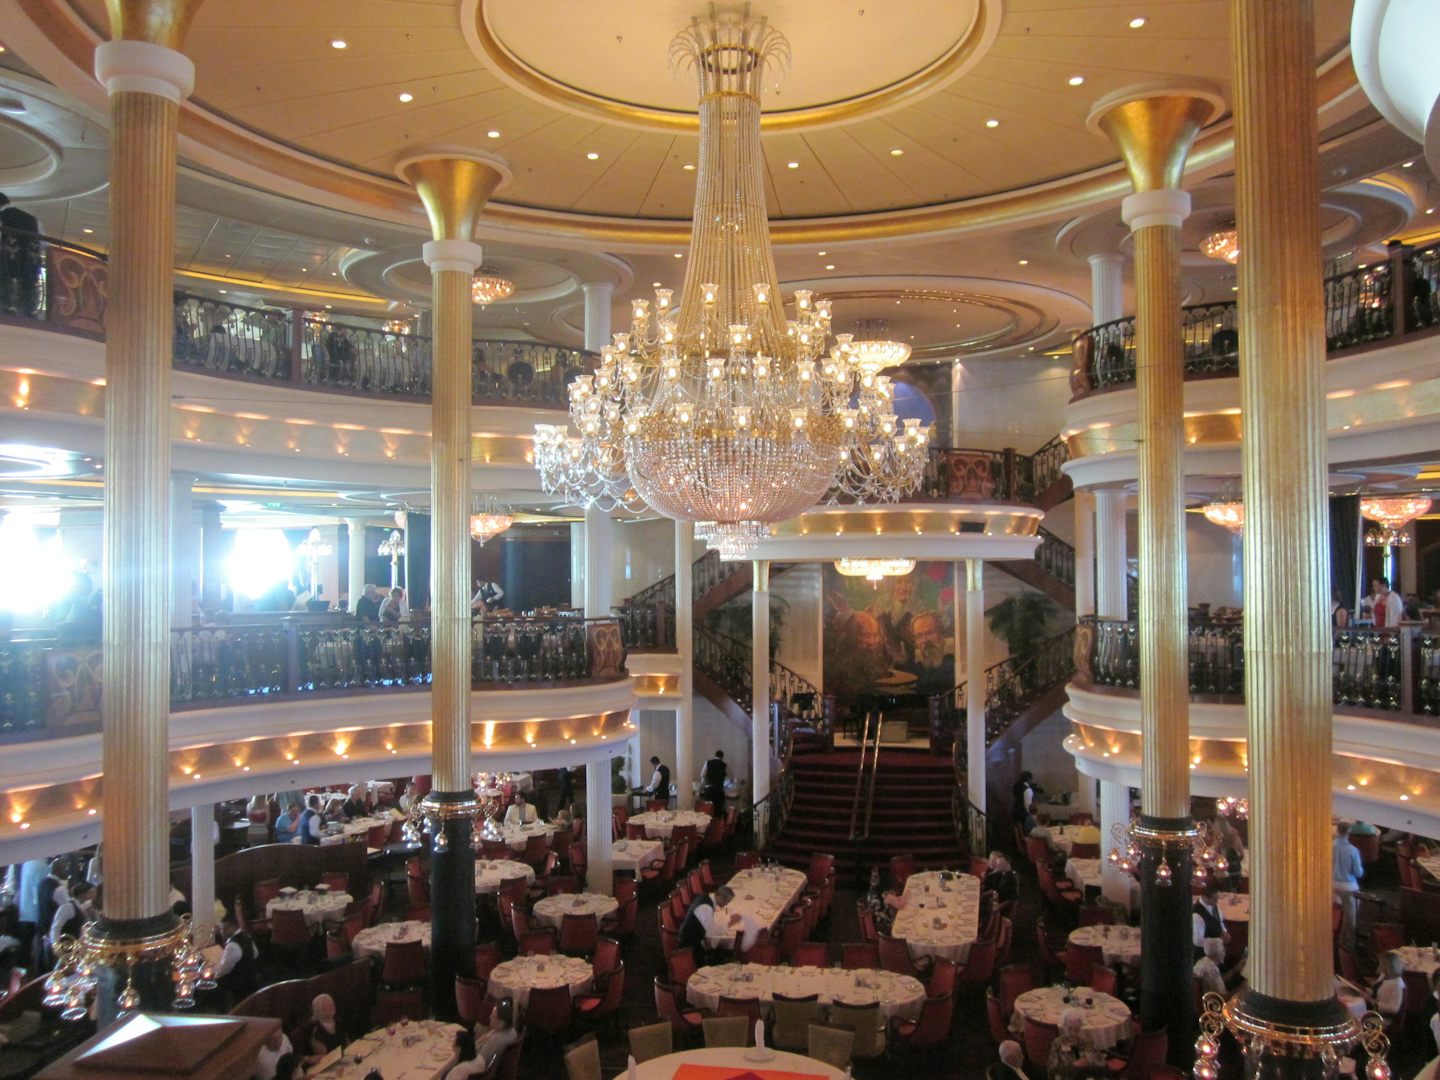 Freedom's  tri-tiered  dining rooms